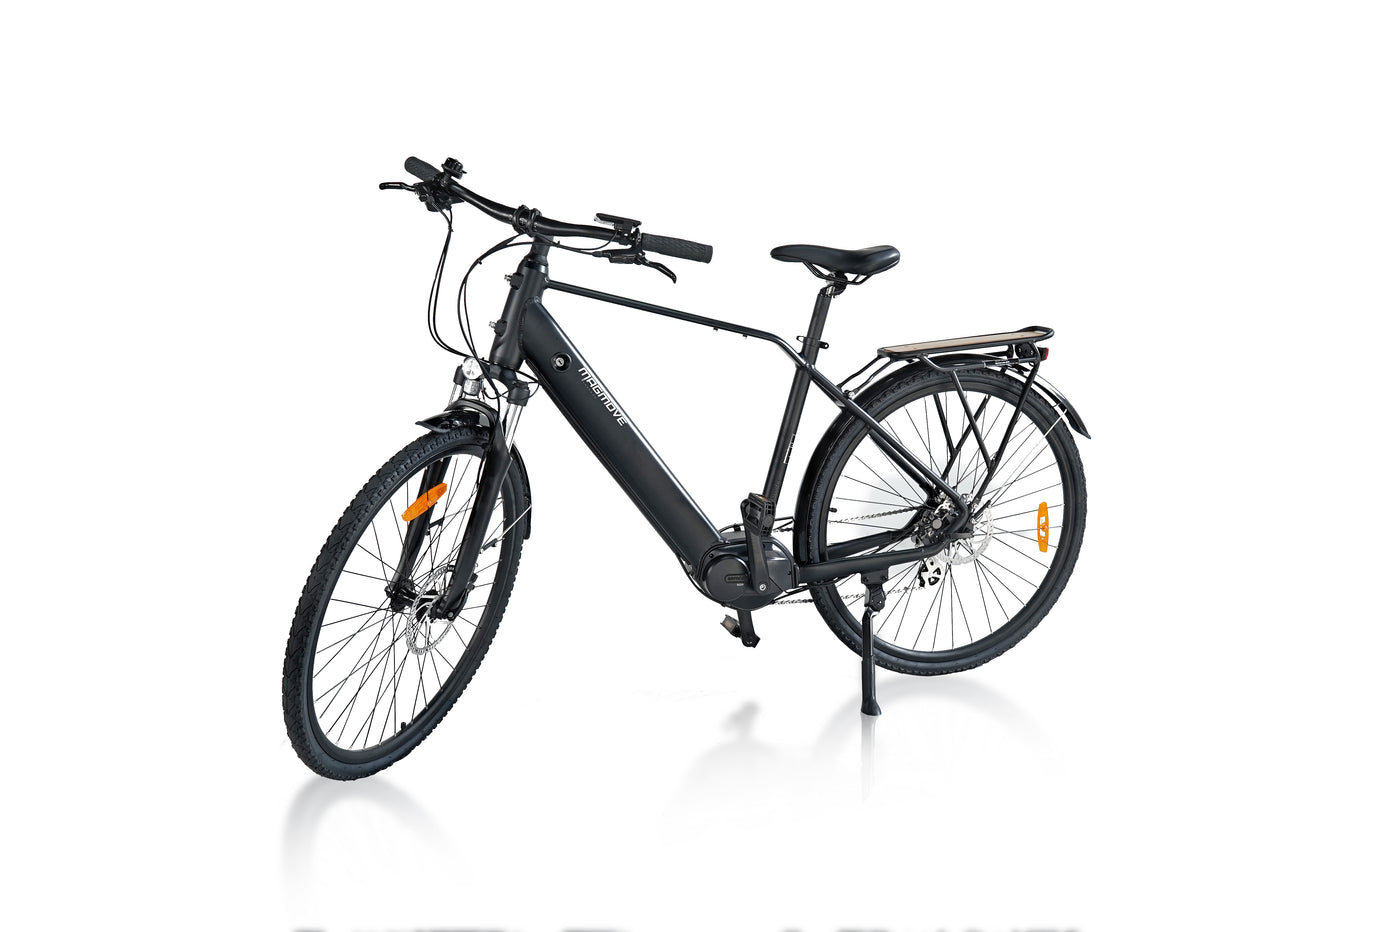 MAGMOVE 700C City eBike: A 250W Mid-mounted Motor, 8-Speed Gear System, 80-120km Range with Adjustable Seating